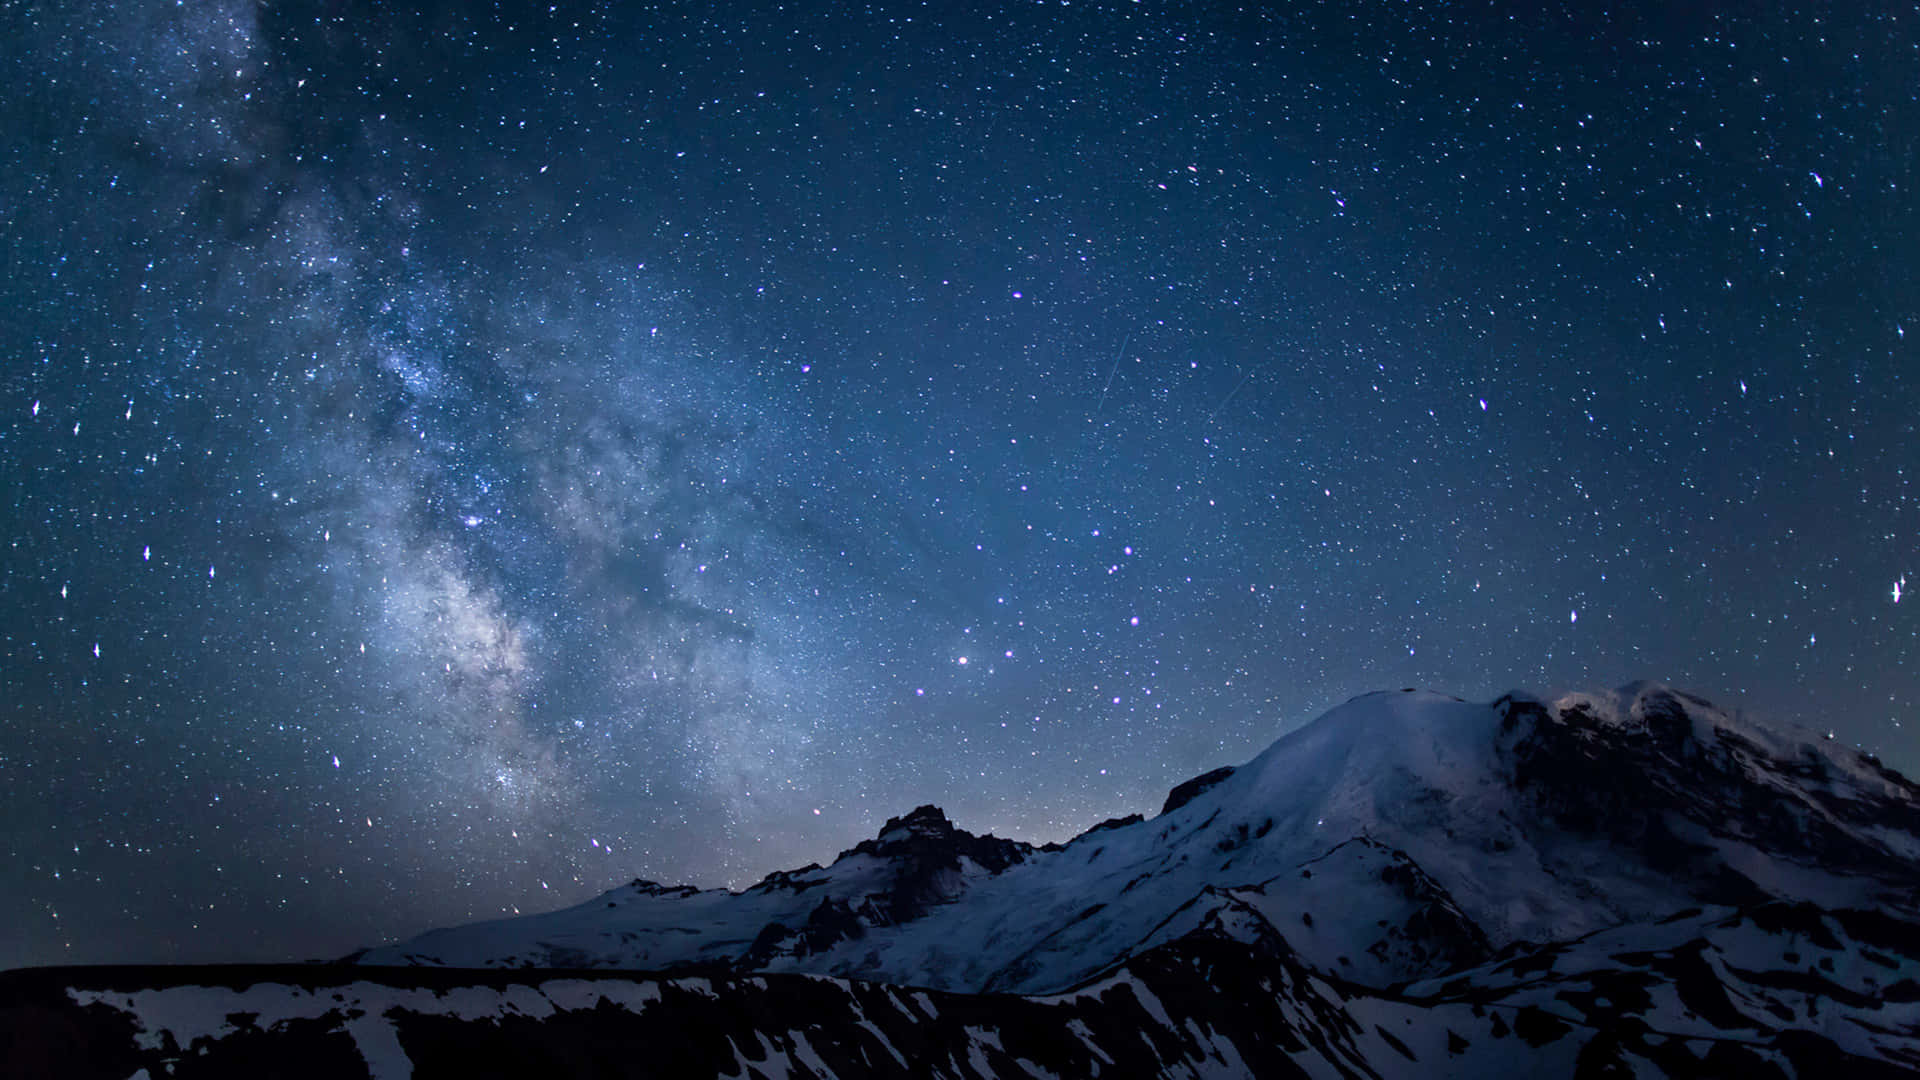 Embrace a starry night with a breathtaking celestial background